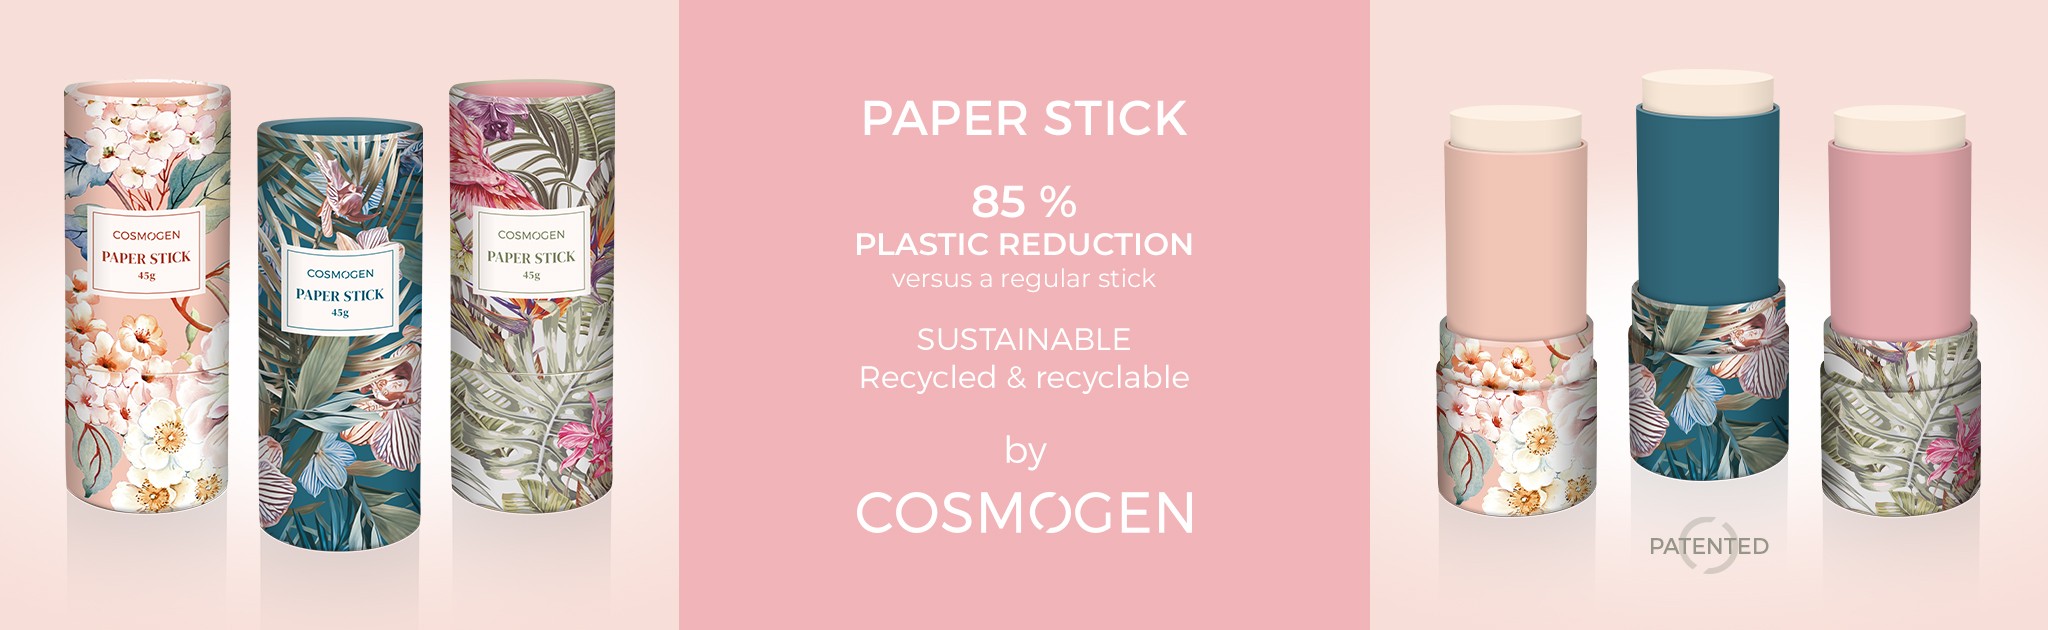 https://www.cosmogen.fr/paper-stick-45.html?search_query=paper+stick&results=1